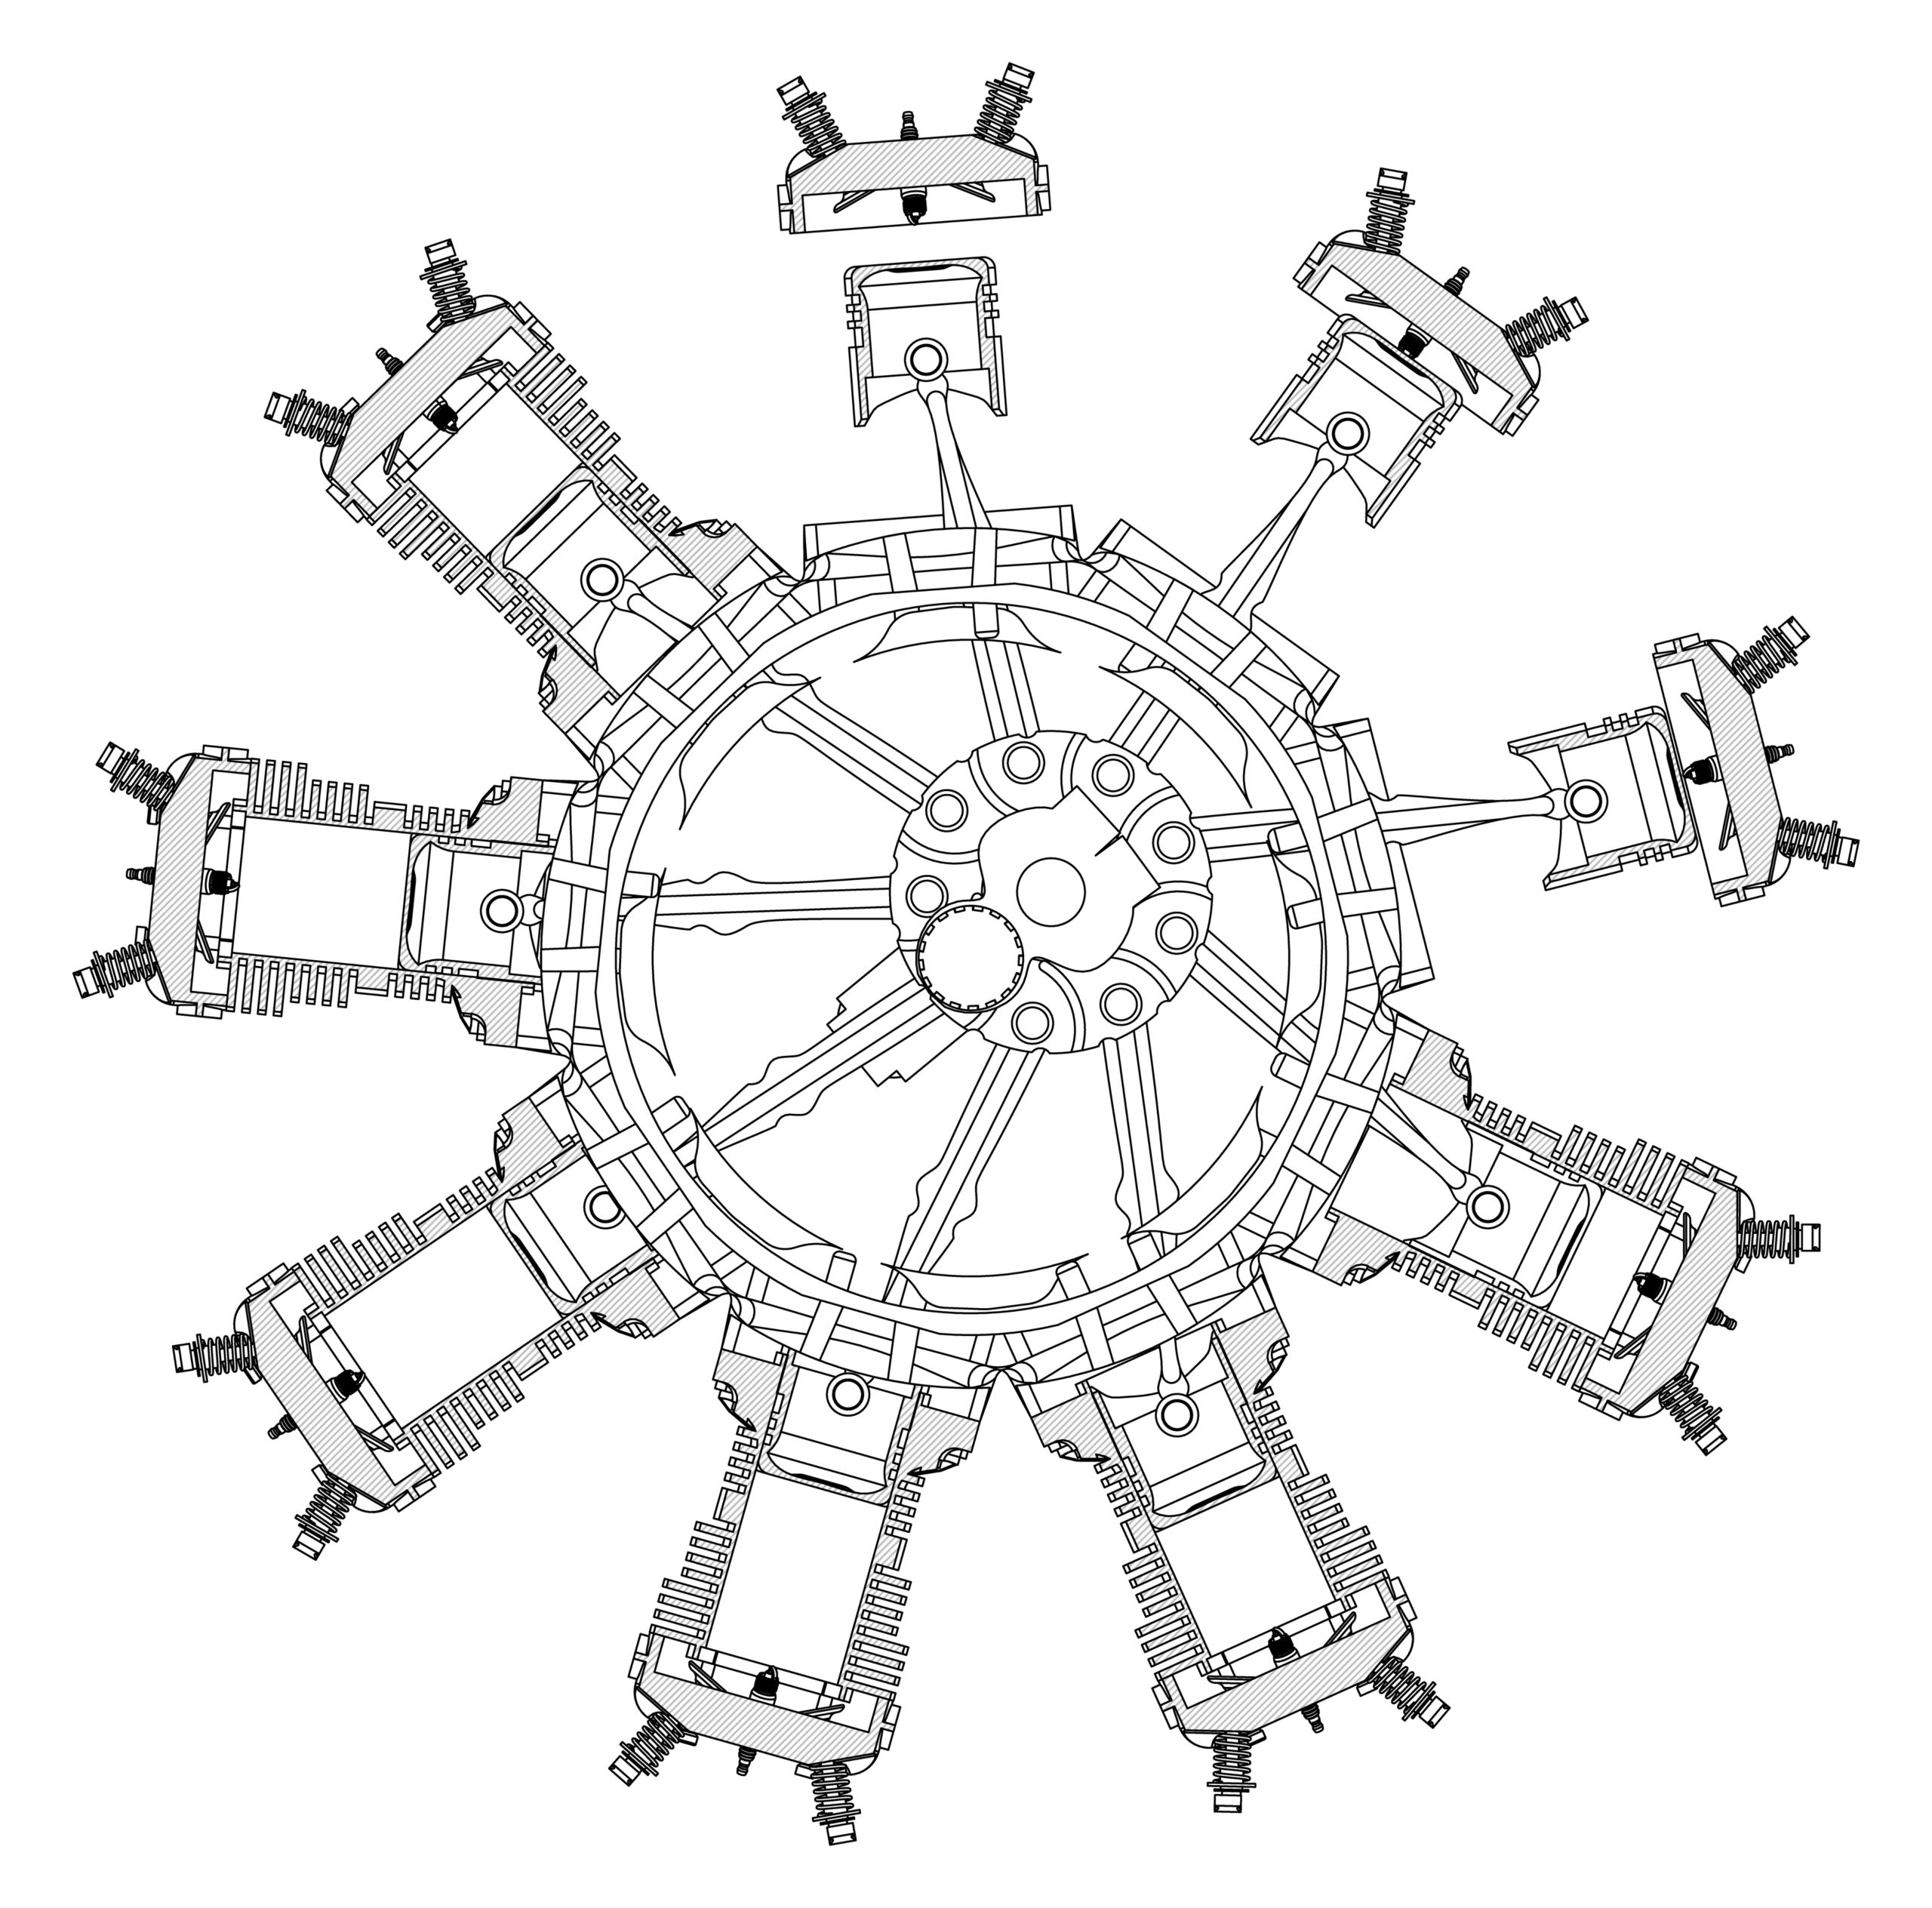 A black-and-white drawing of a radial engine